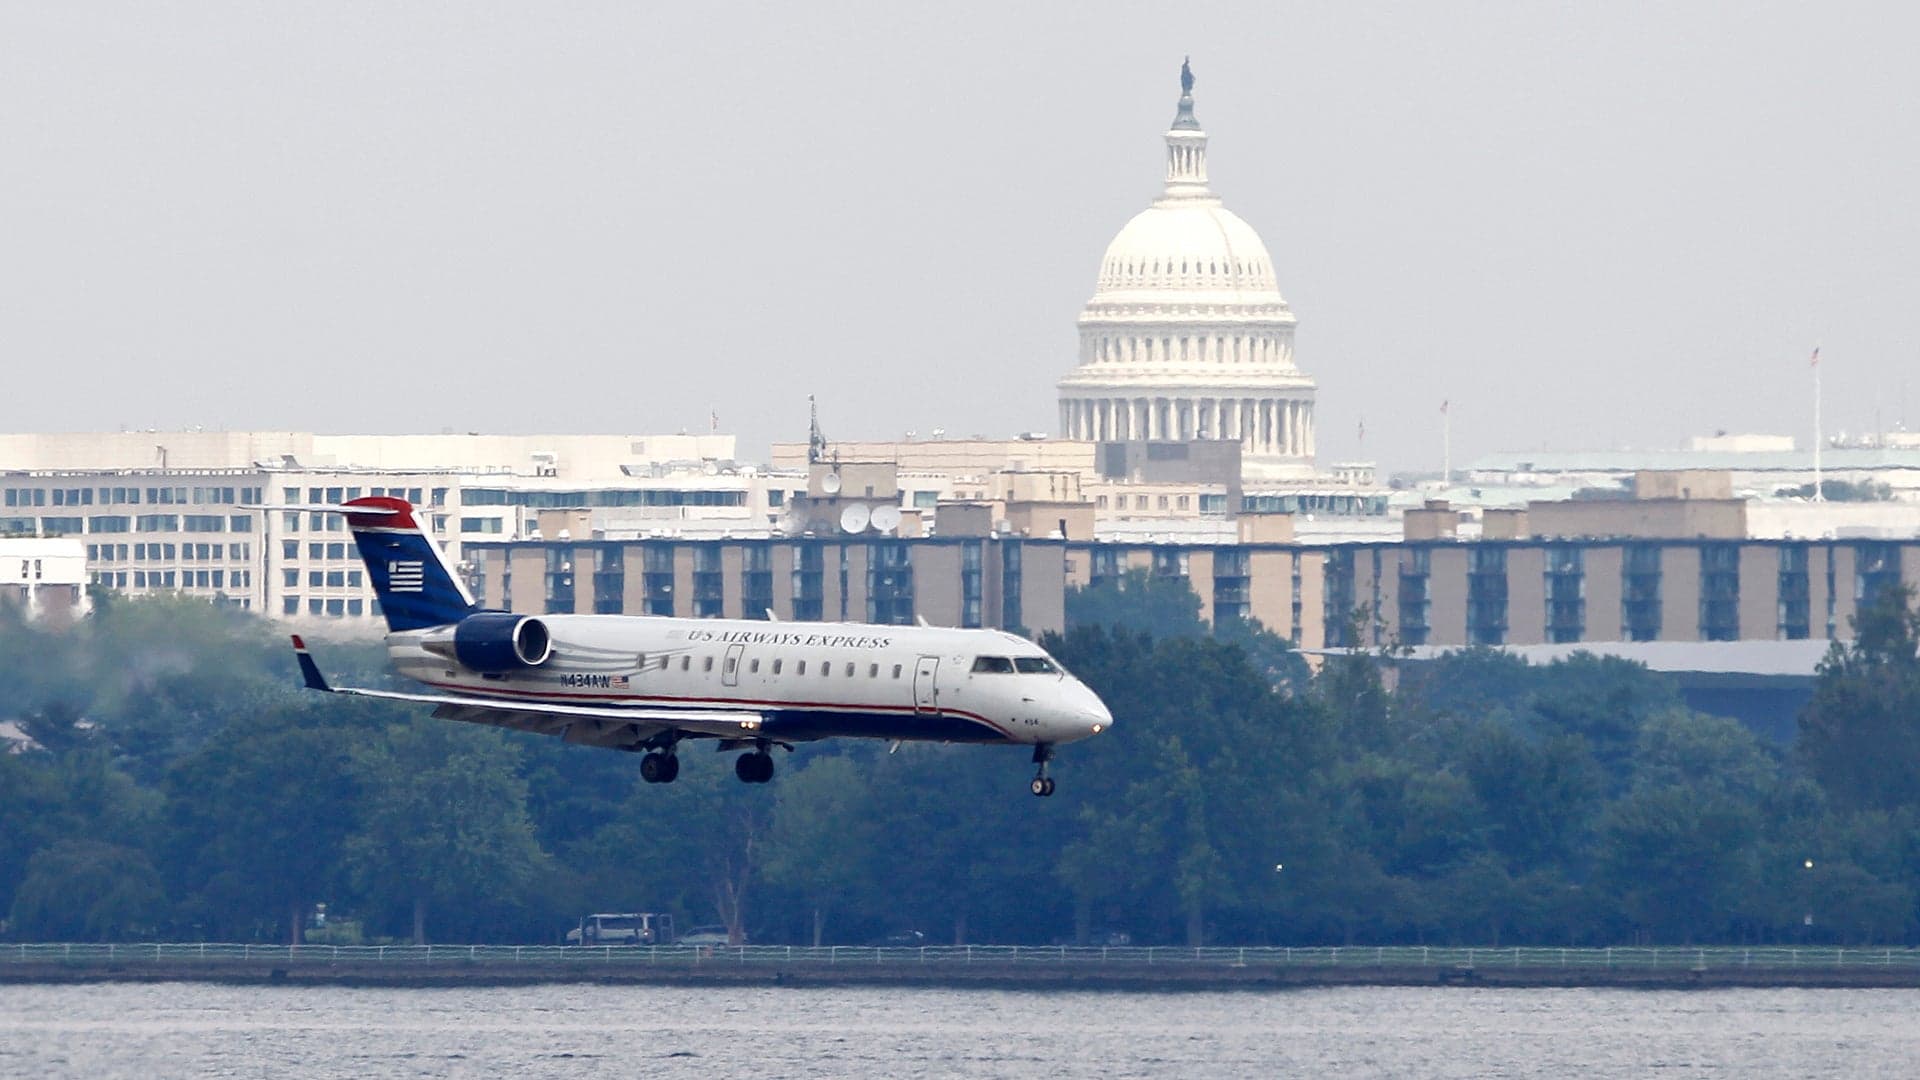 Ominous Iran-Related Threat To Fly Plane Into Capitol Broadcast To Air Traffic Controllers